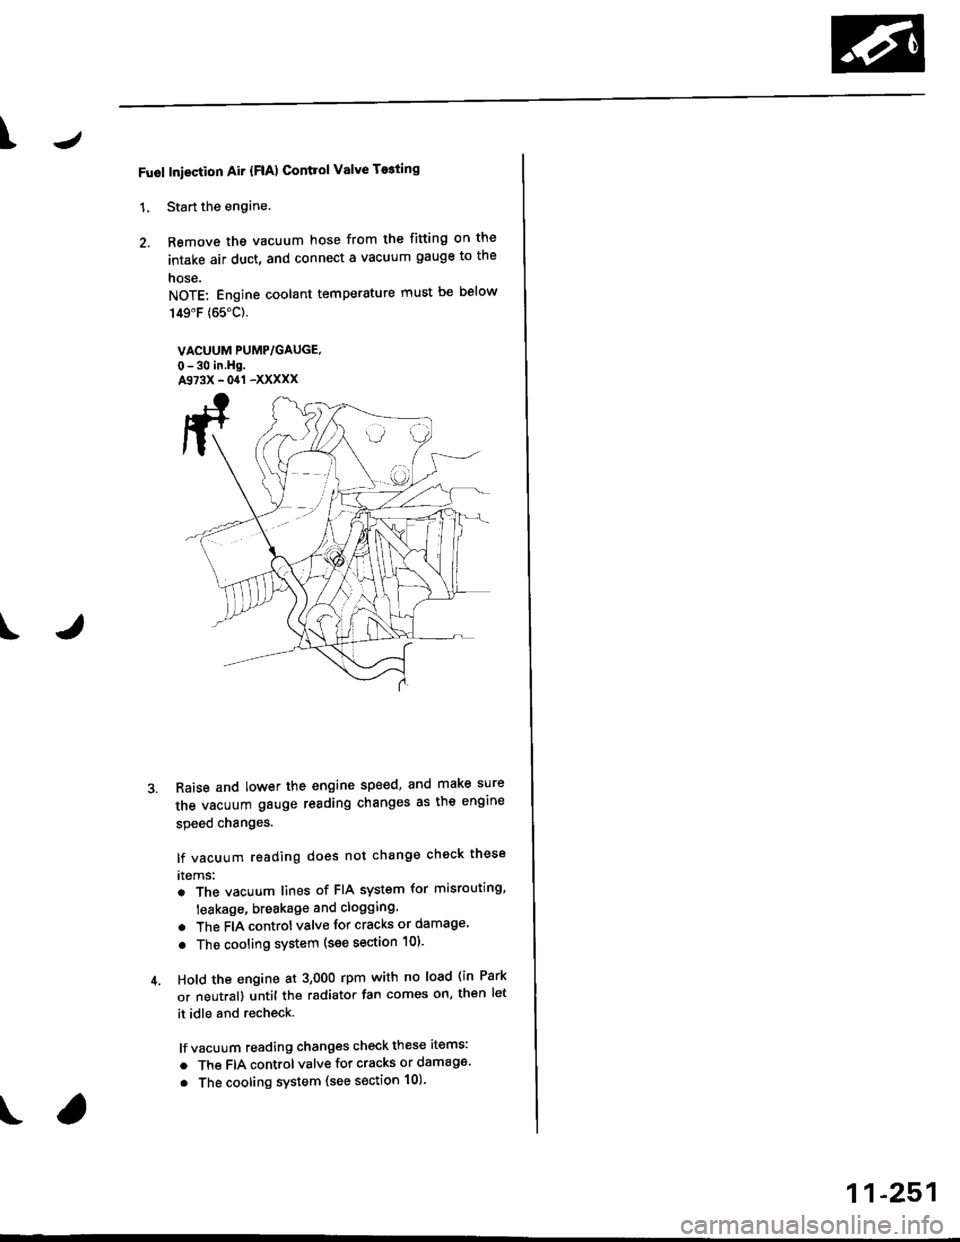 HONDA CIVIC 1998 6.G Service Manual \J
Fuol Iniection Air {FlA) Contlol Valve T$ting
1. Start the engine.
2. Remove the vacuum hose from the fitting on the
intake air duct, and connect a vacuum gauge to the
nose.
NOTE: Engine coolant te